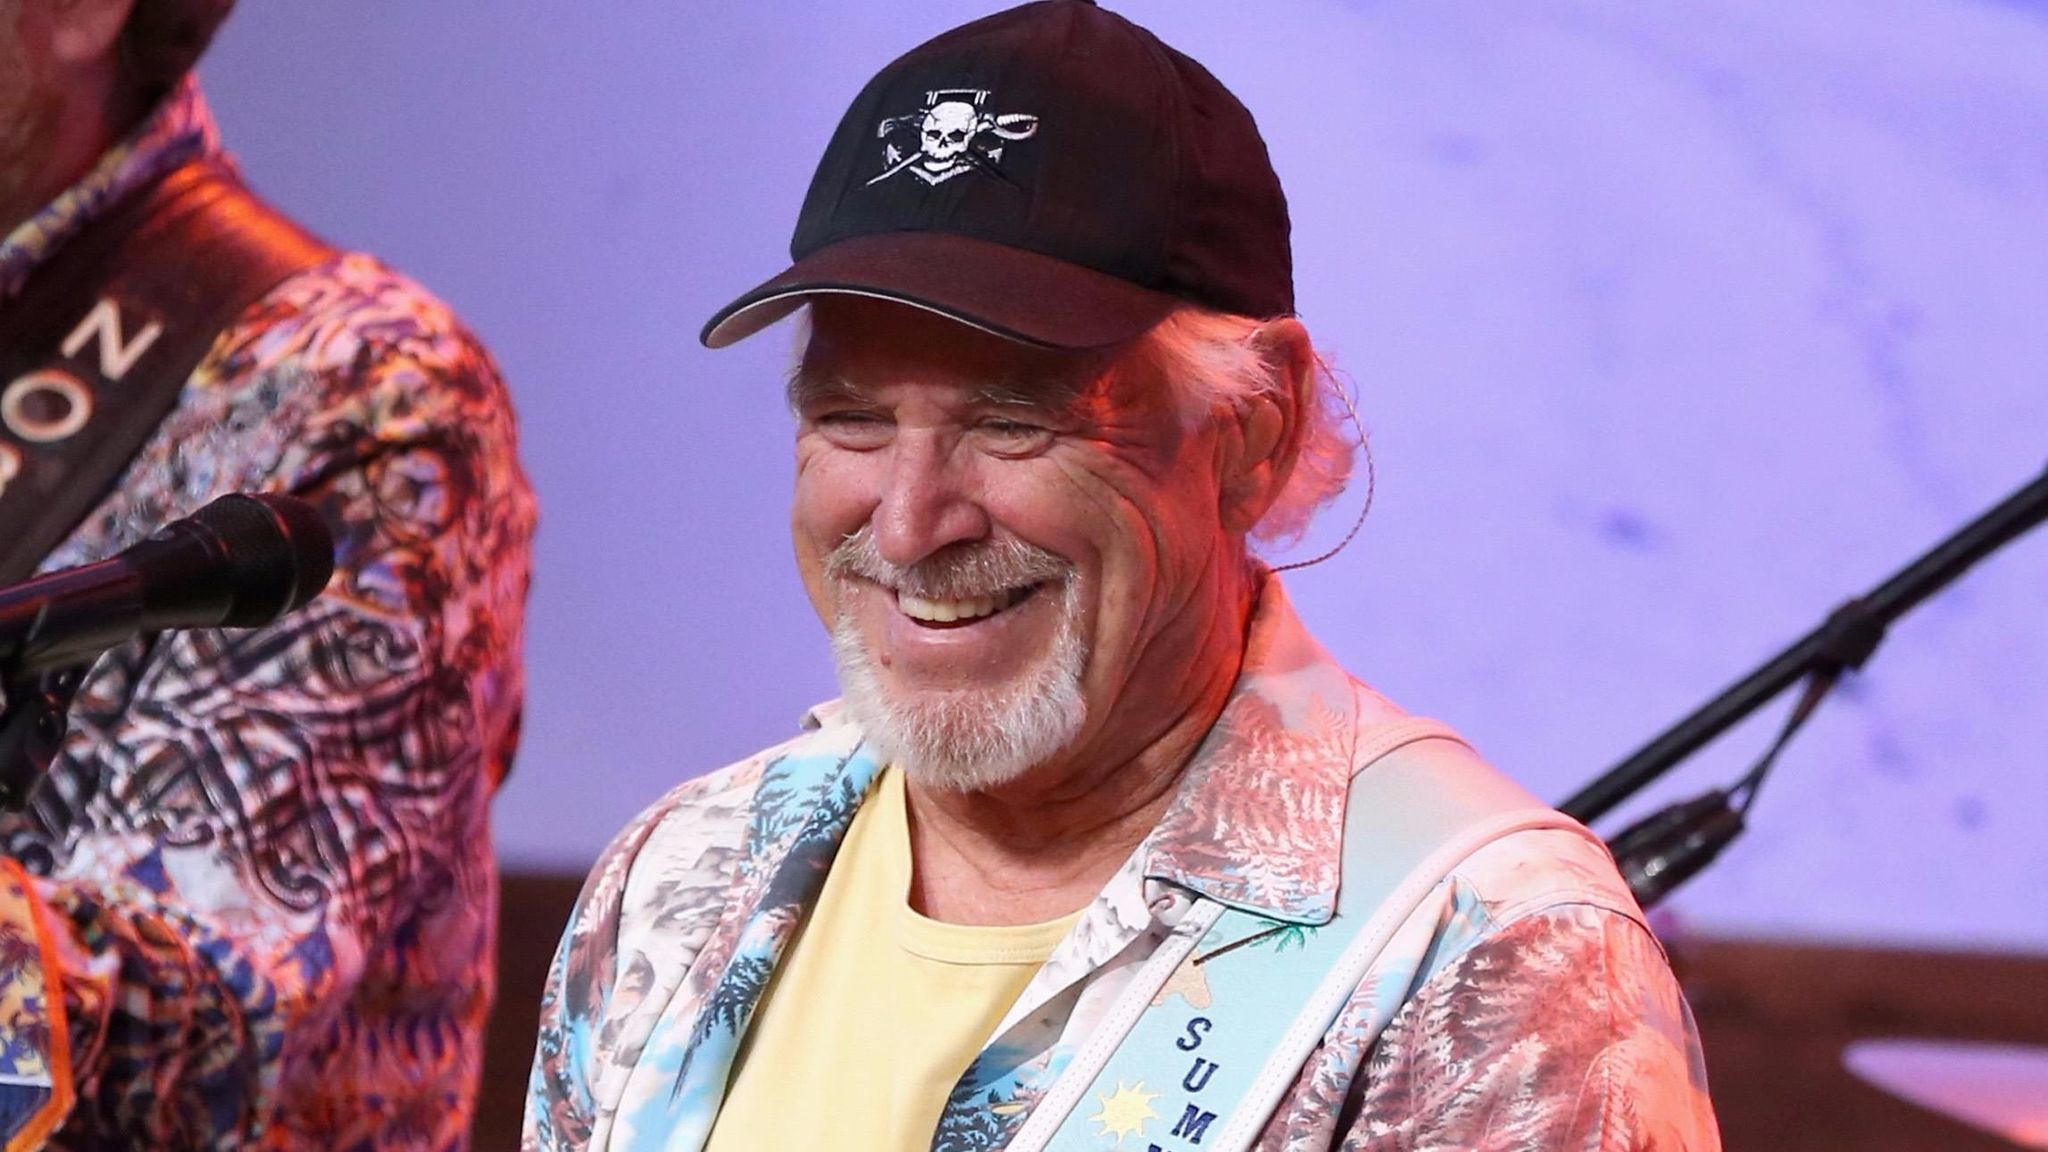 Jimmy Buffett comes to La Jolla for debut of new musical 'Escape to Margaritaville' - Los Angeles Times